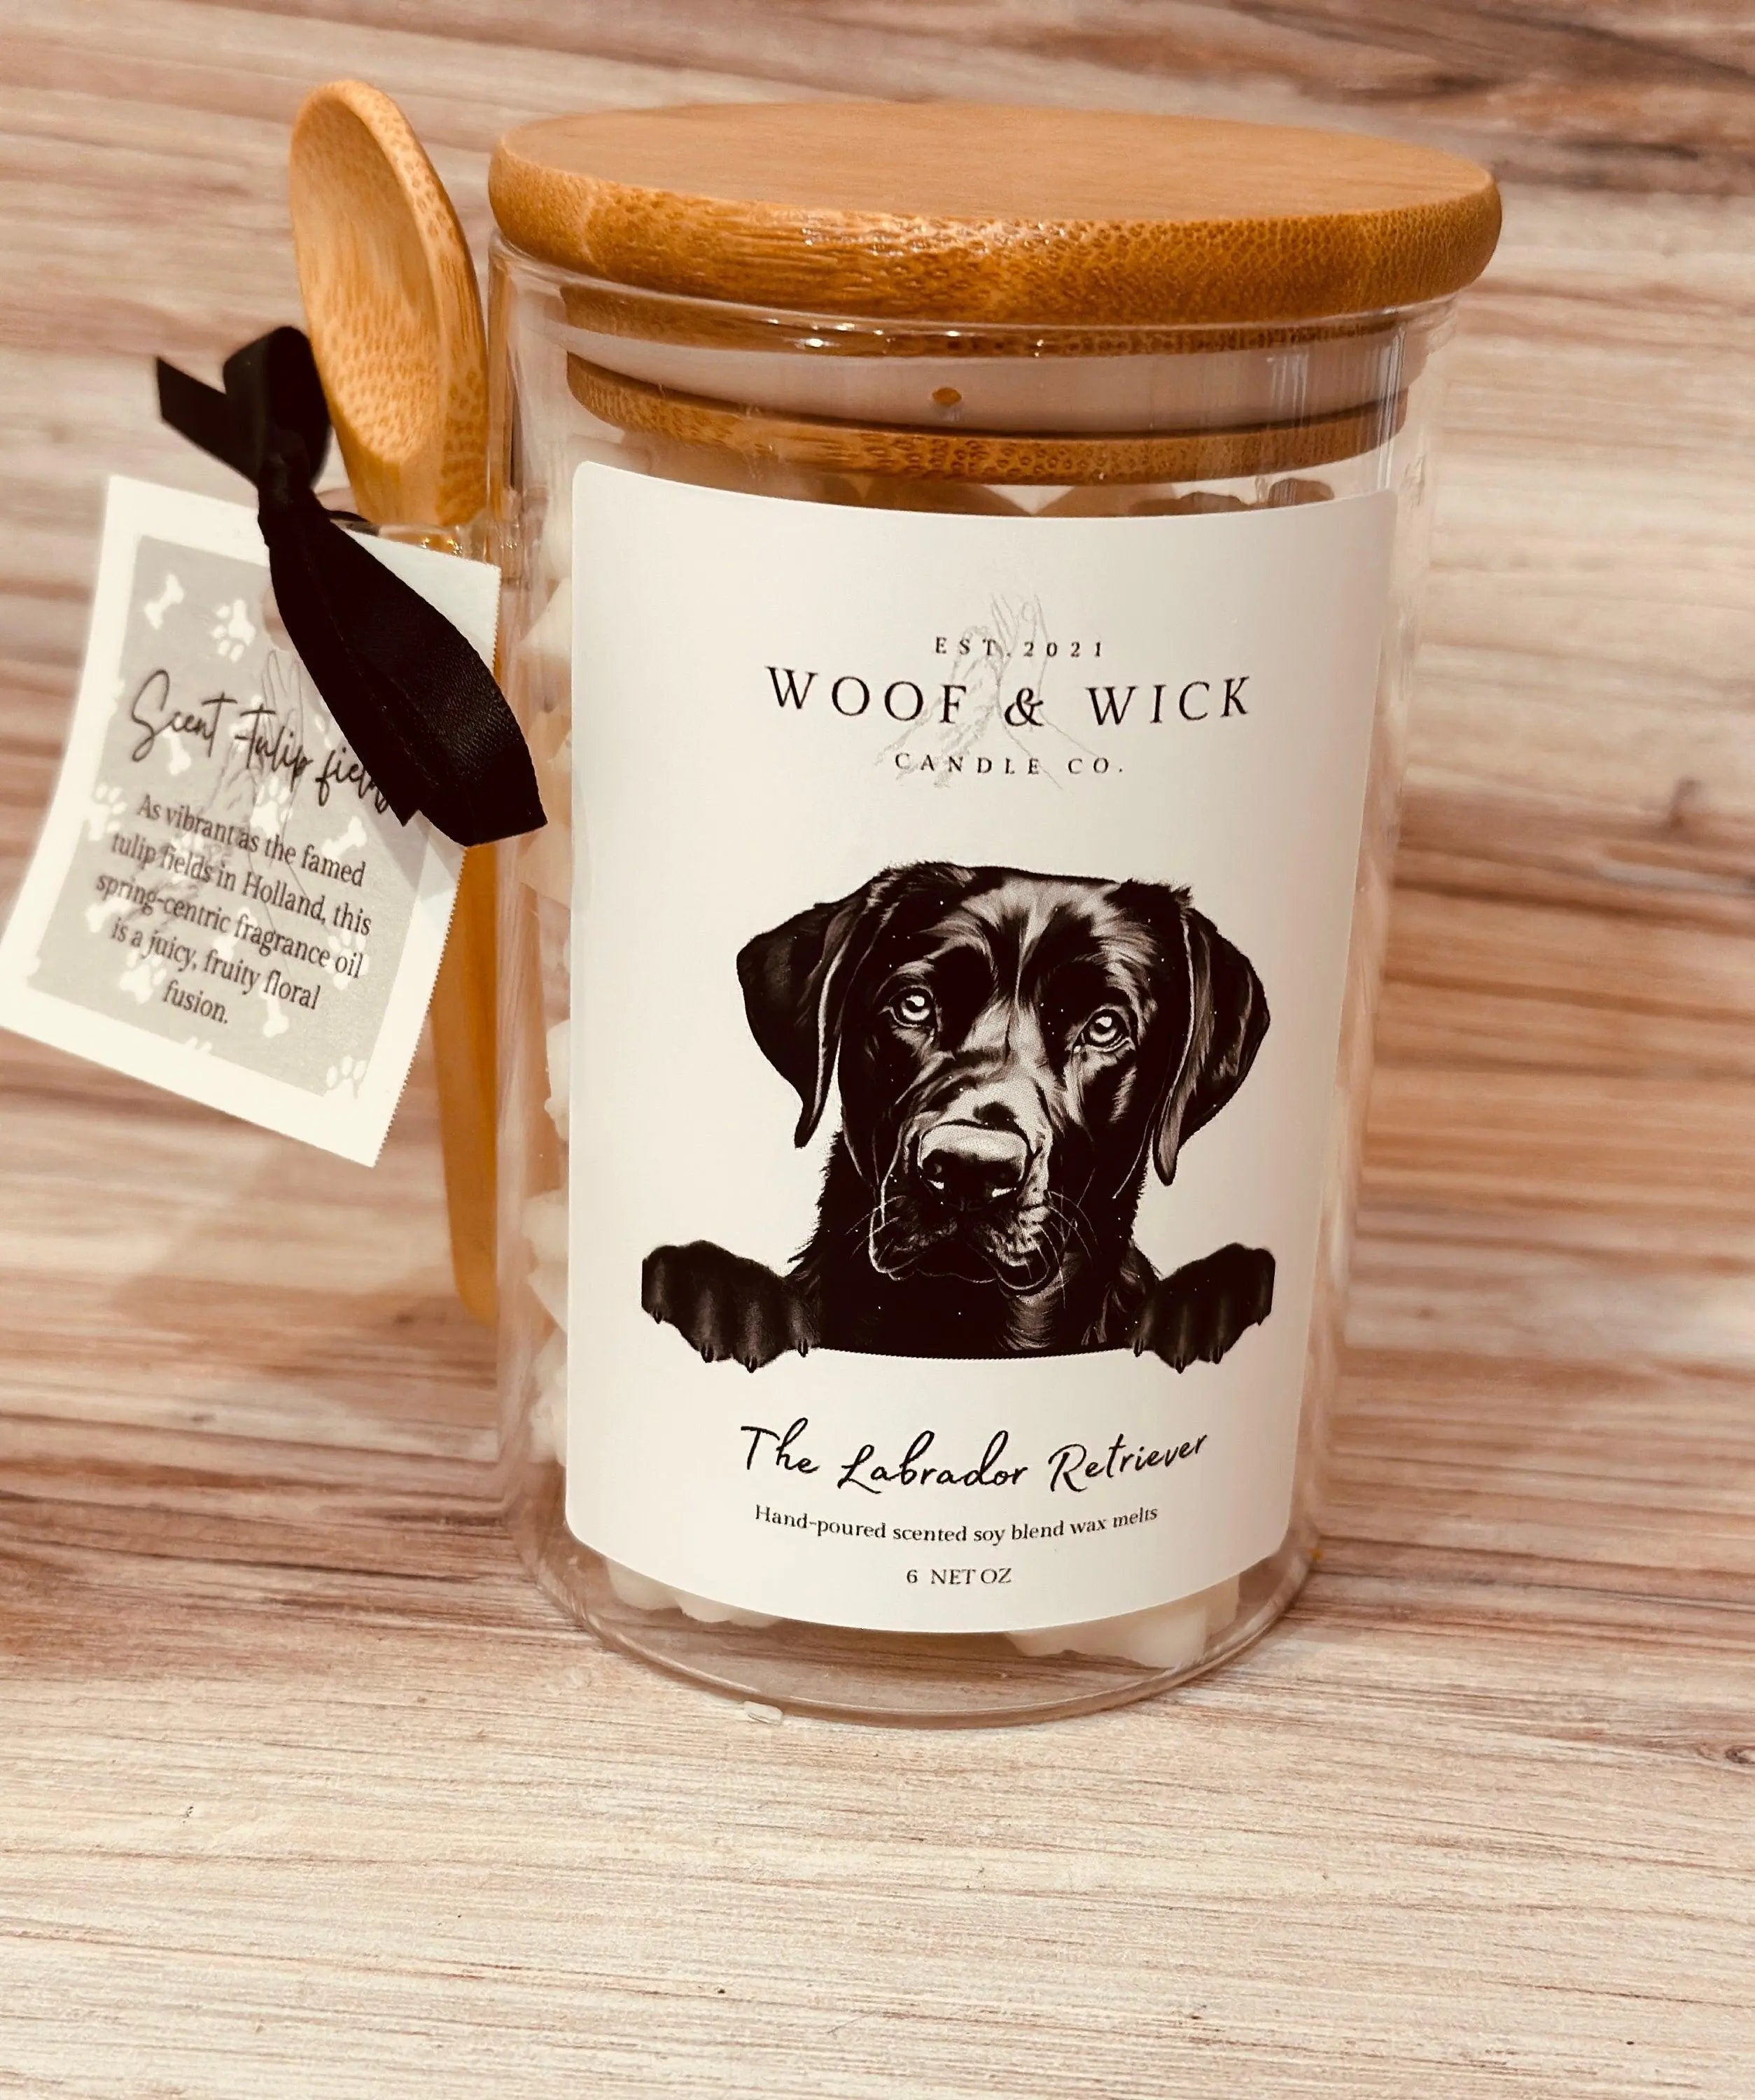 The Labrador Retriever-Personalized Dog Breed Soy Wax Melts for Wax Warmers - Woof & Wick Candle Co.